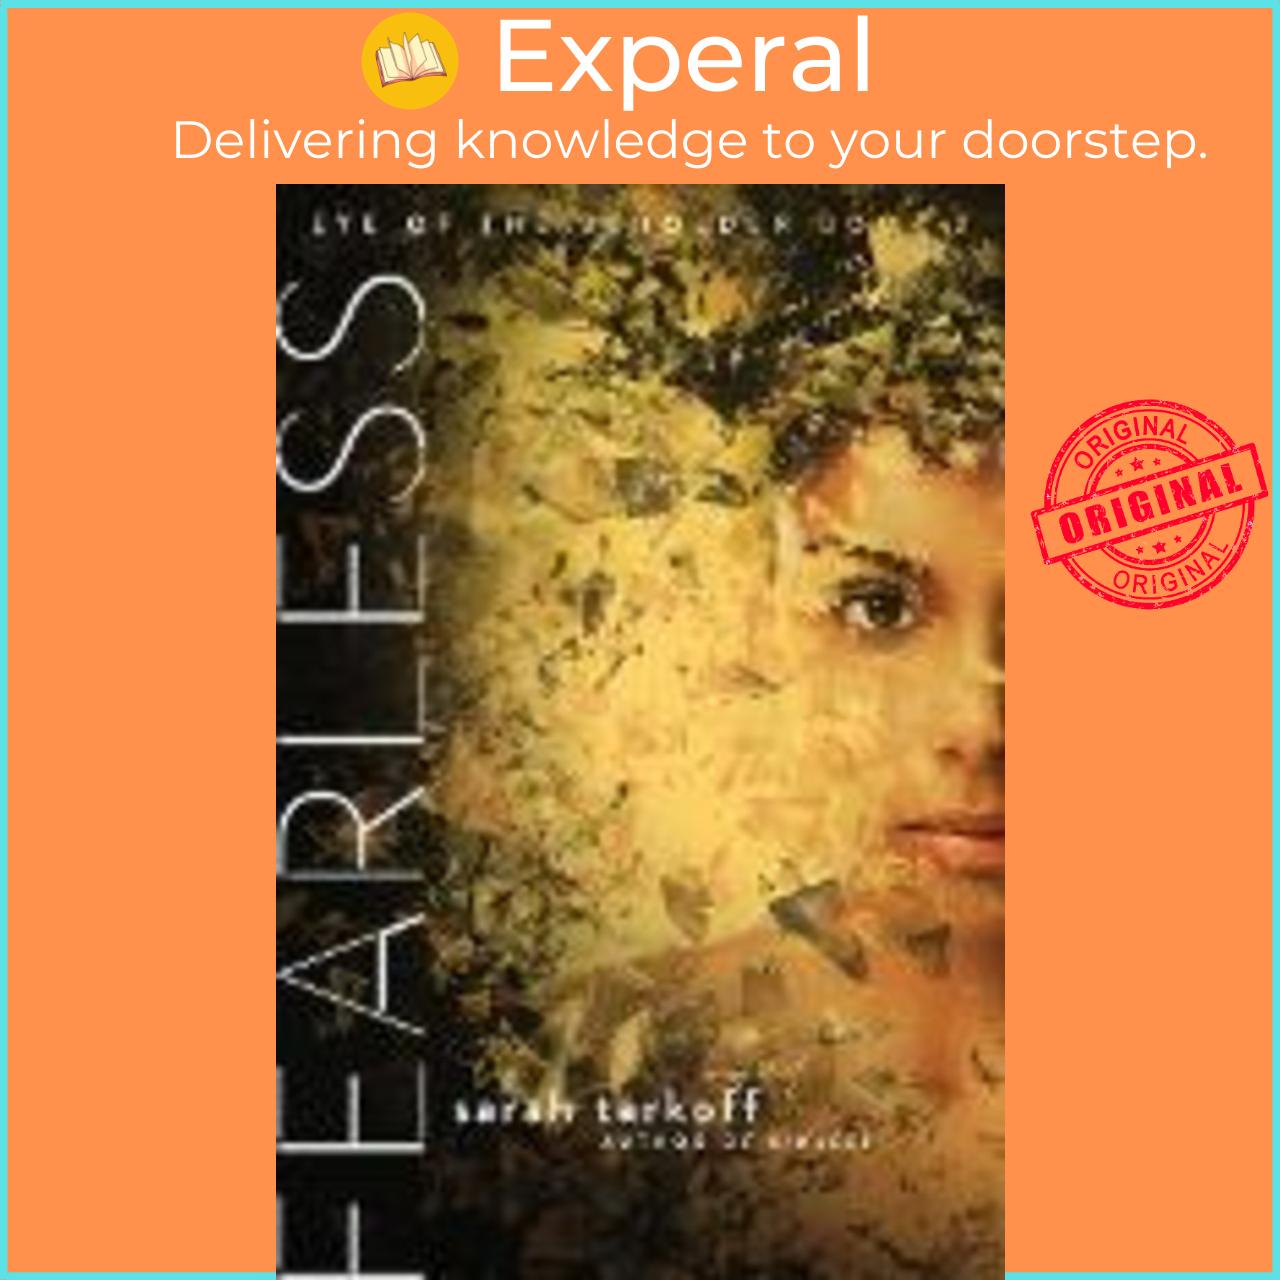 Sách - Fearless by Sarah Tarkoff (US edition, paperback)